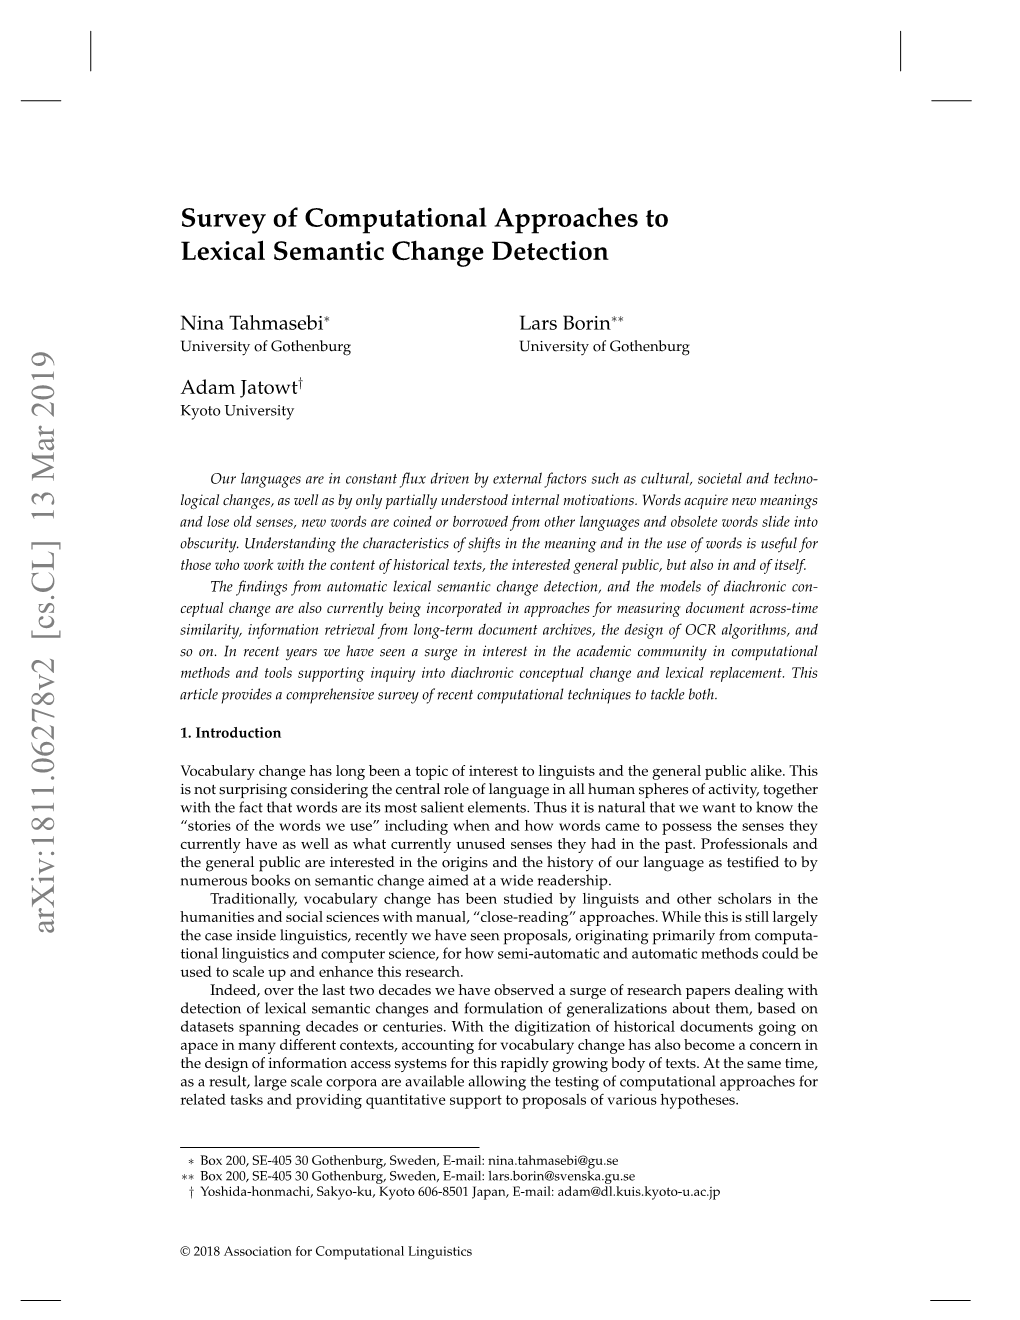 Survey of Computational Approaches to Lexical Semantic Change Detection